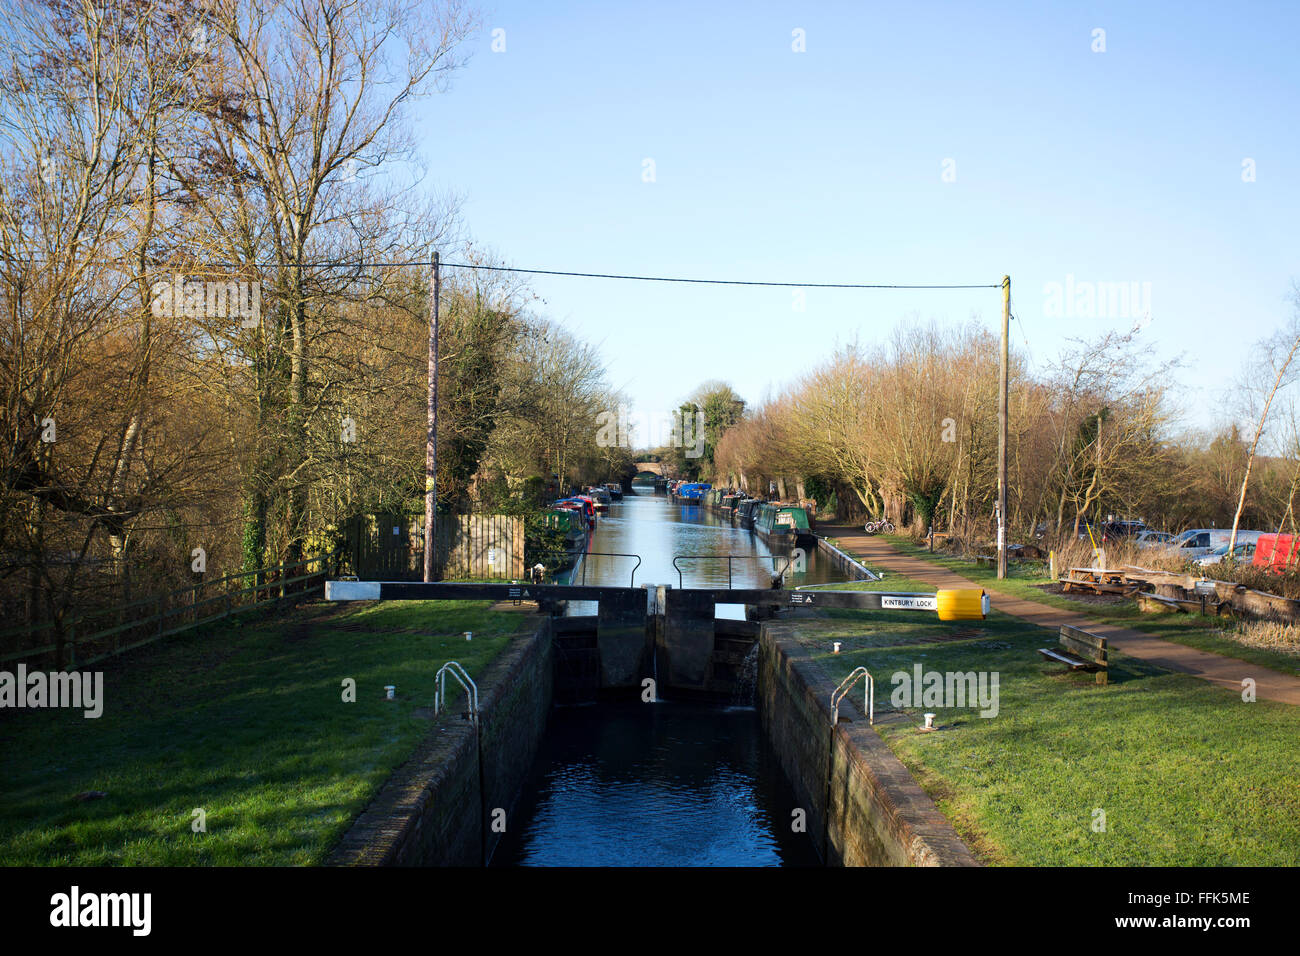 Kintbury Lock canal lock in the English countryside with trees and blue sky in Hungerford, Berkshire, UK. Stock Photo